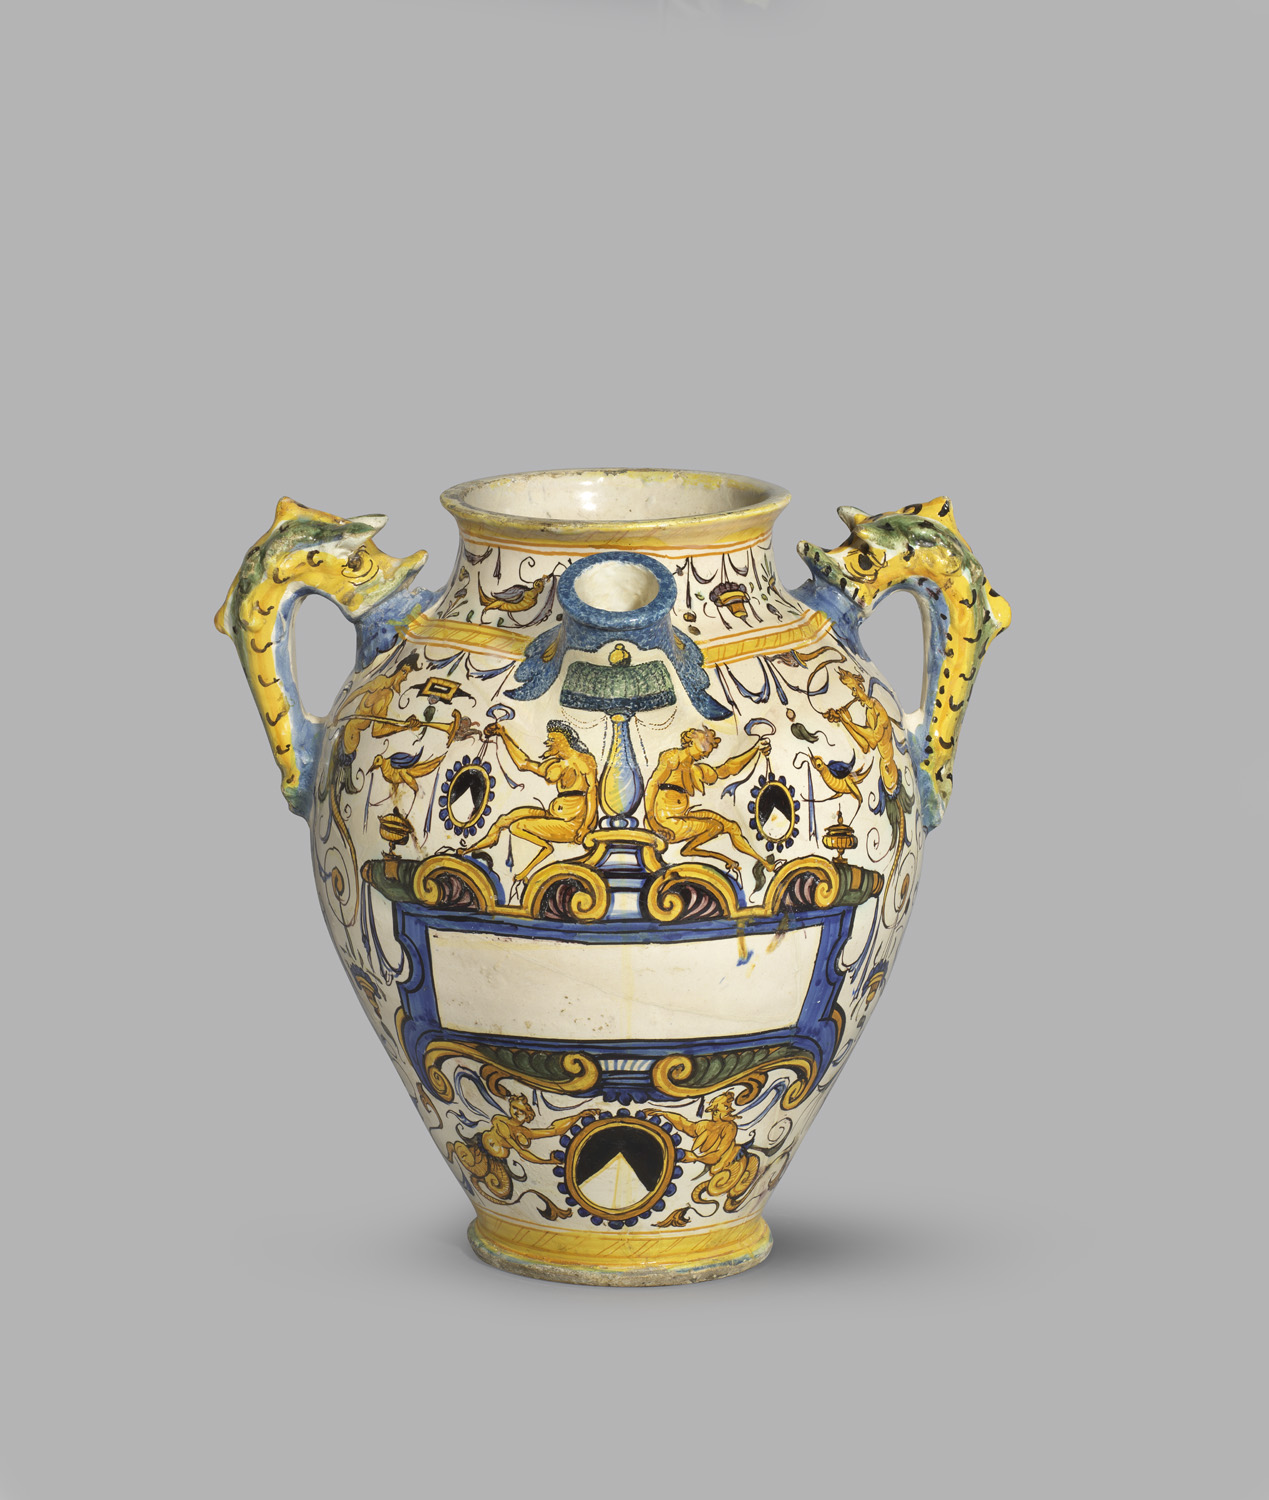 A pharmacy jar with two dragon-shaped handles, painted with fantastical figures in blue and yellow; A space in the centre is left blank to be inscribed with content name or other information